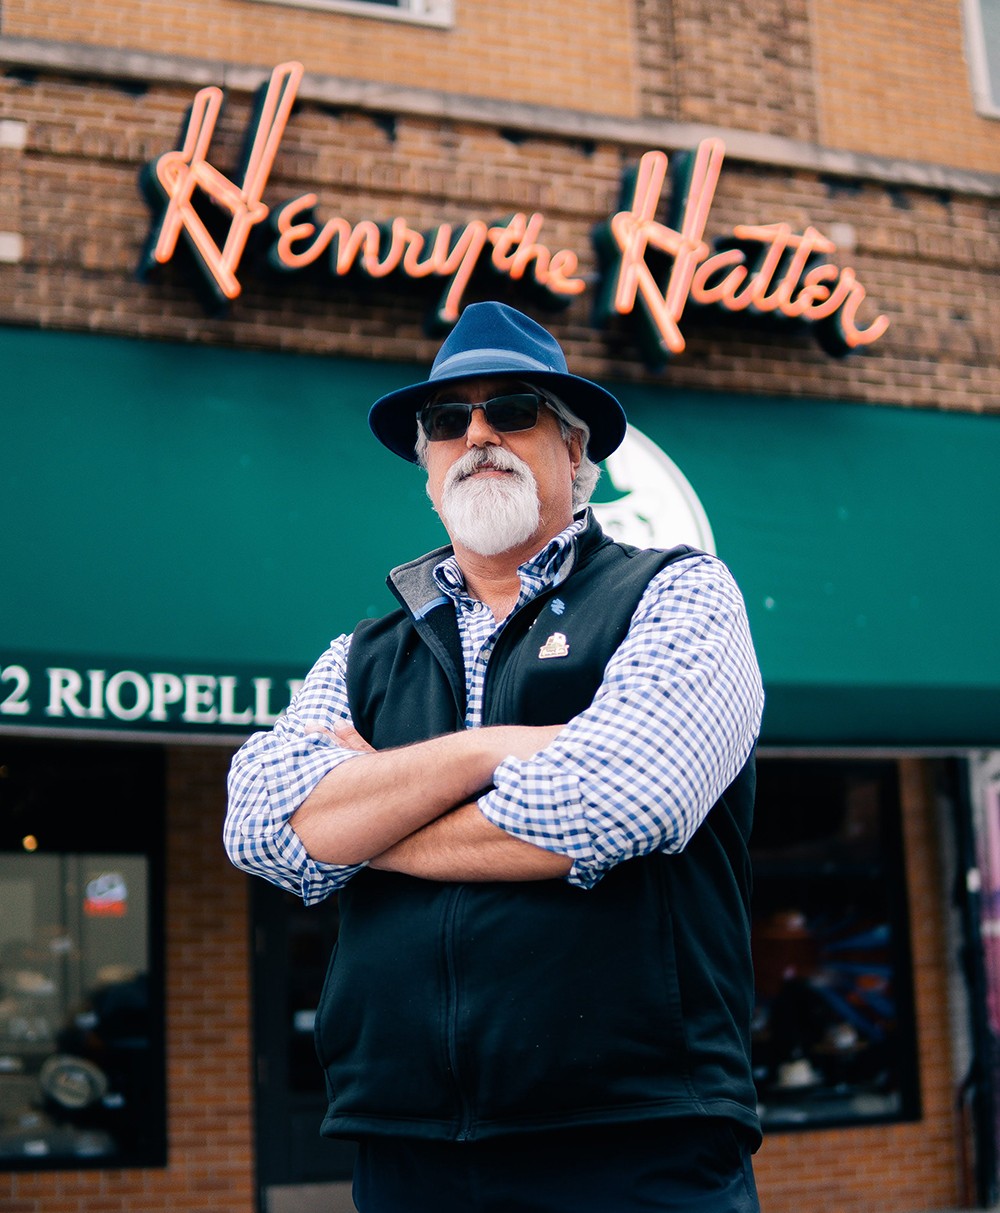 Henry the Hatter, the nation’s oldest hat retailer, turns 130 this year with Detroiter Joe Renkiewicz at the helm. Both locations – Detroit’s Eastern Market (pictured) and Southfield – will celebrate with a new sale promotion each month. - Alessandro Uribe